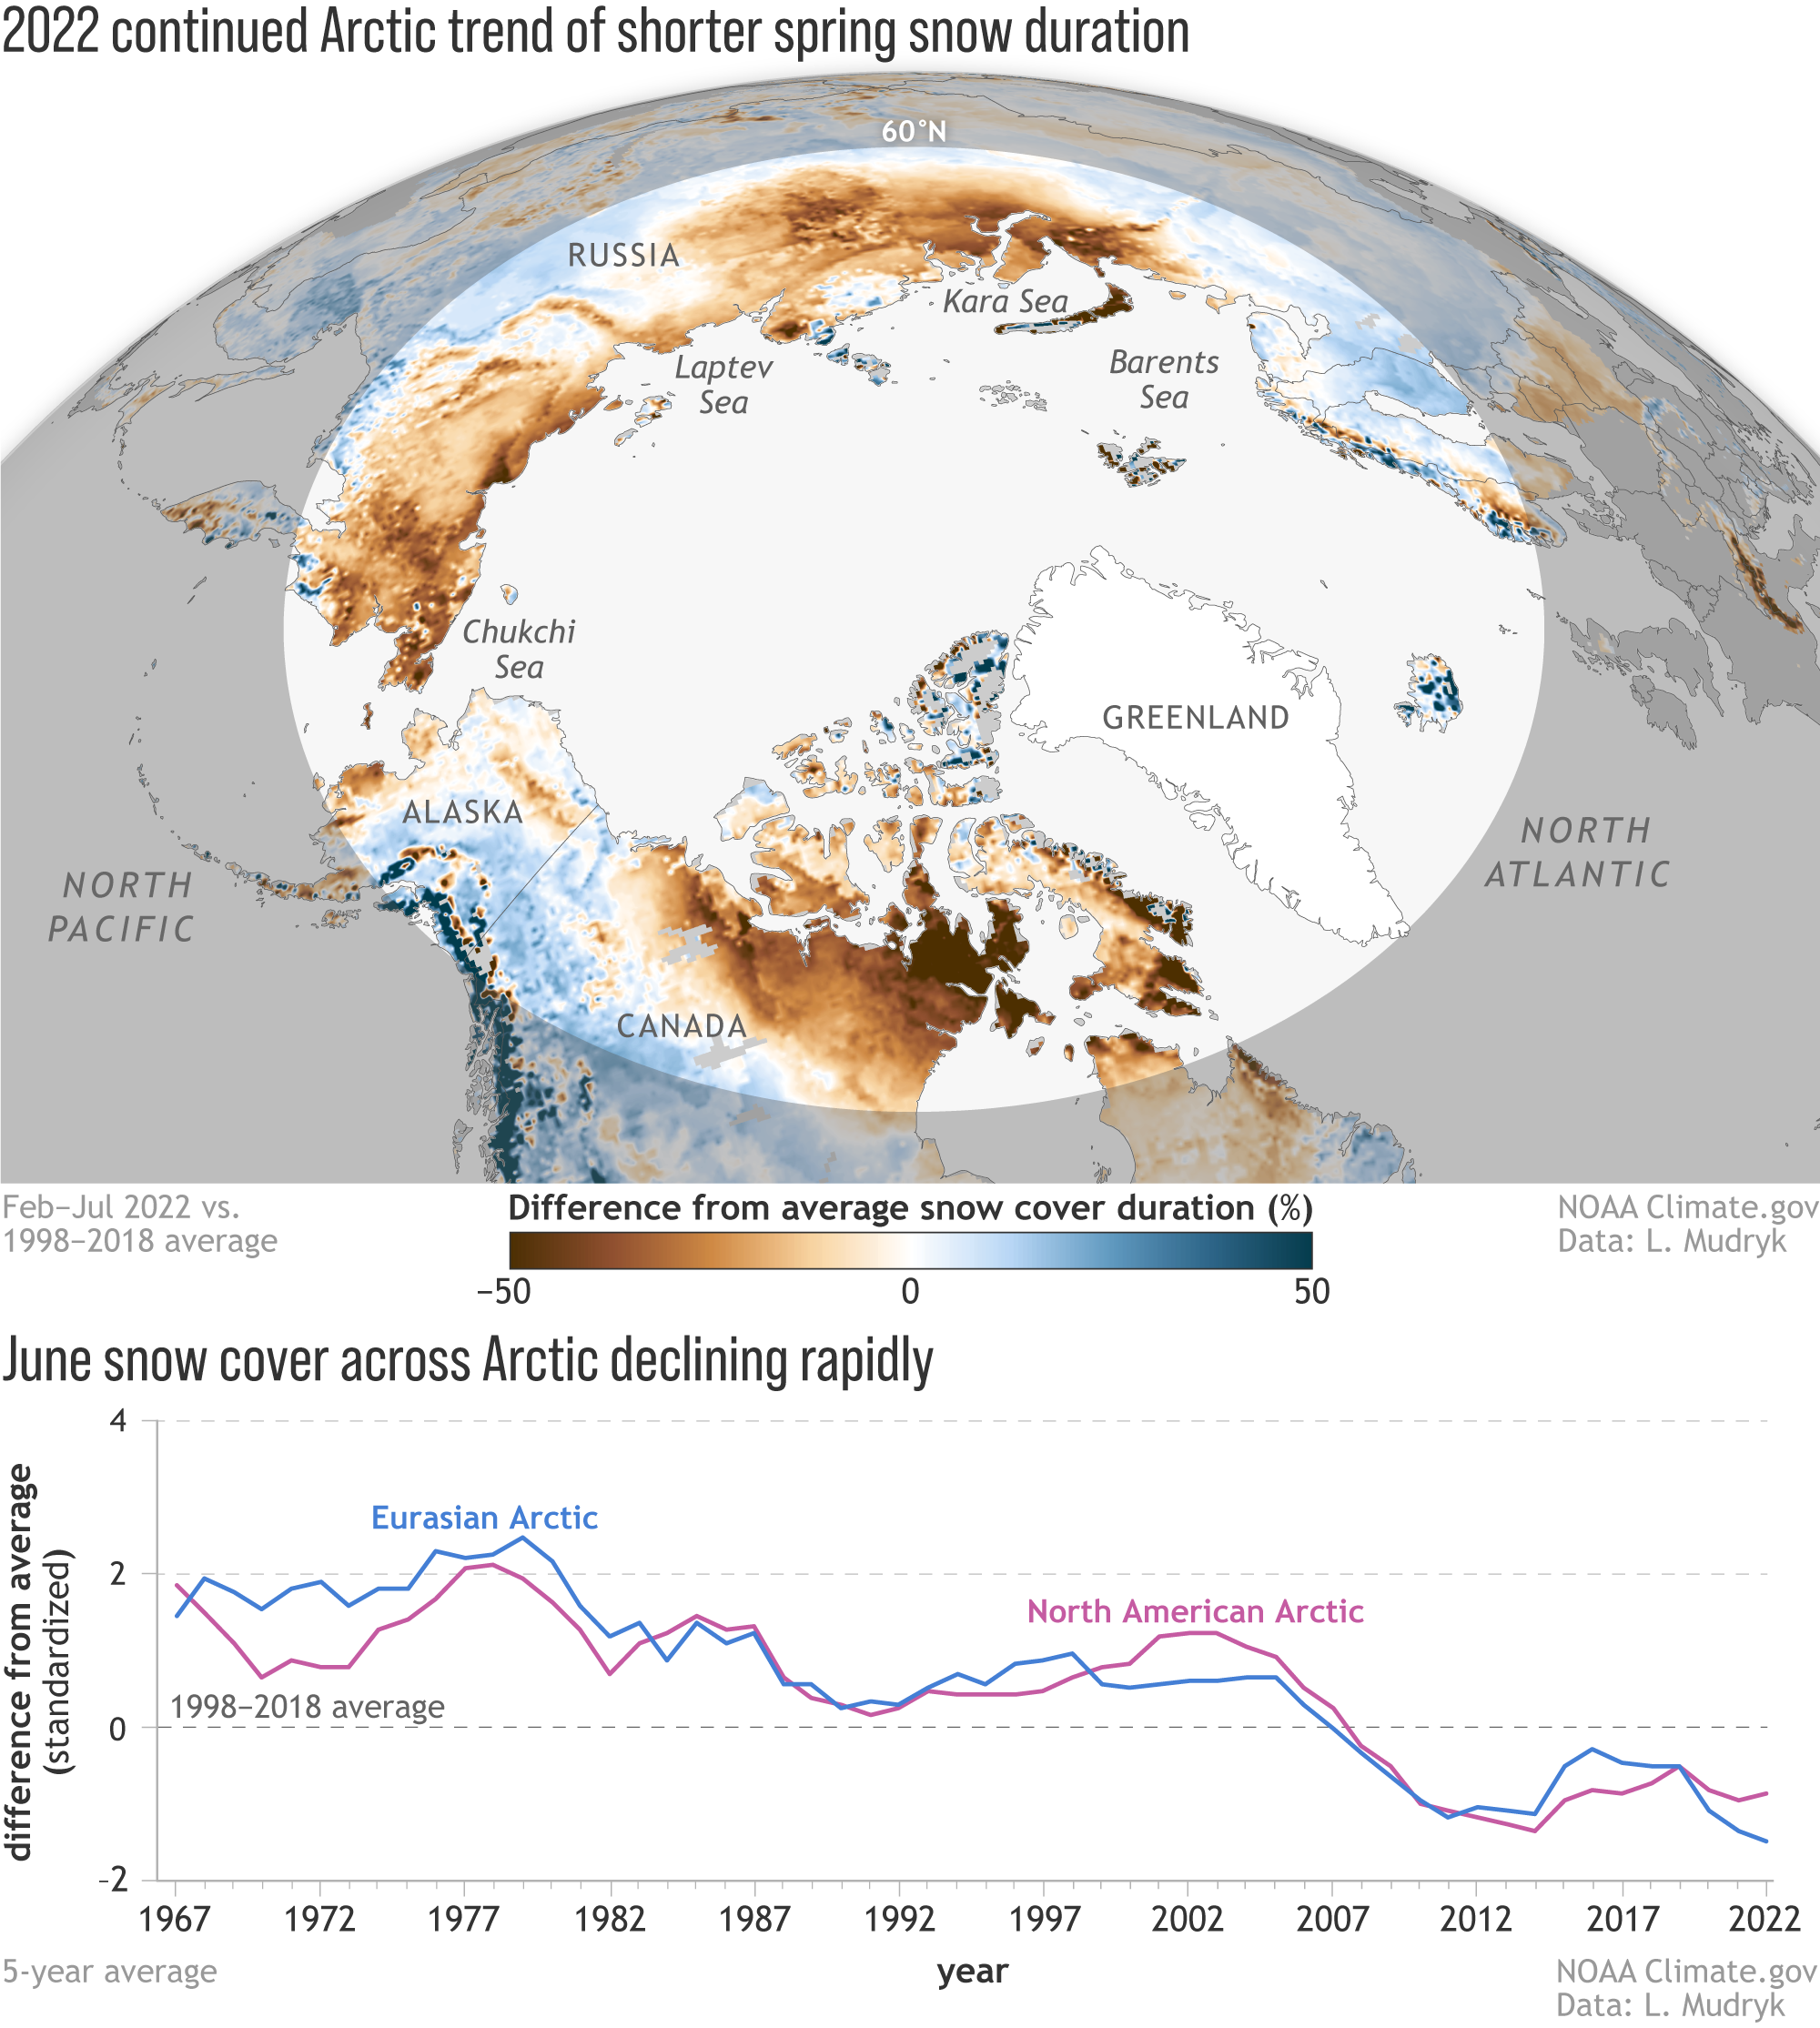 Climate change: spring snow cover in the Northern Hemisphere